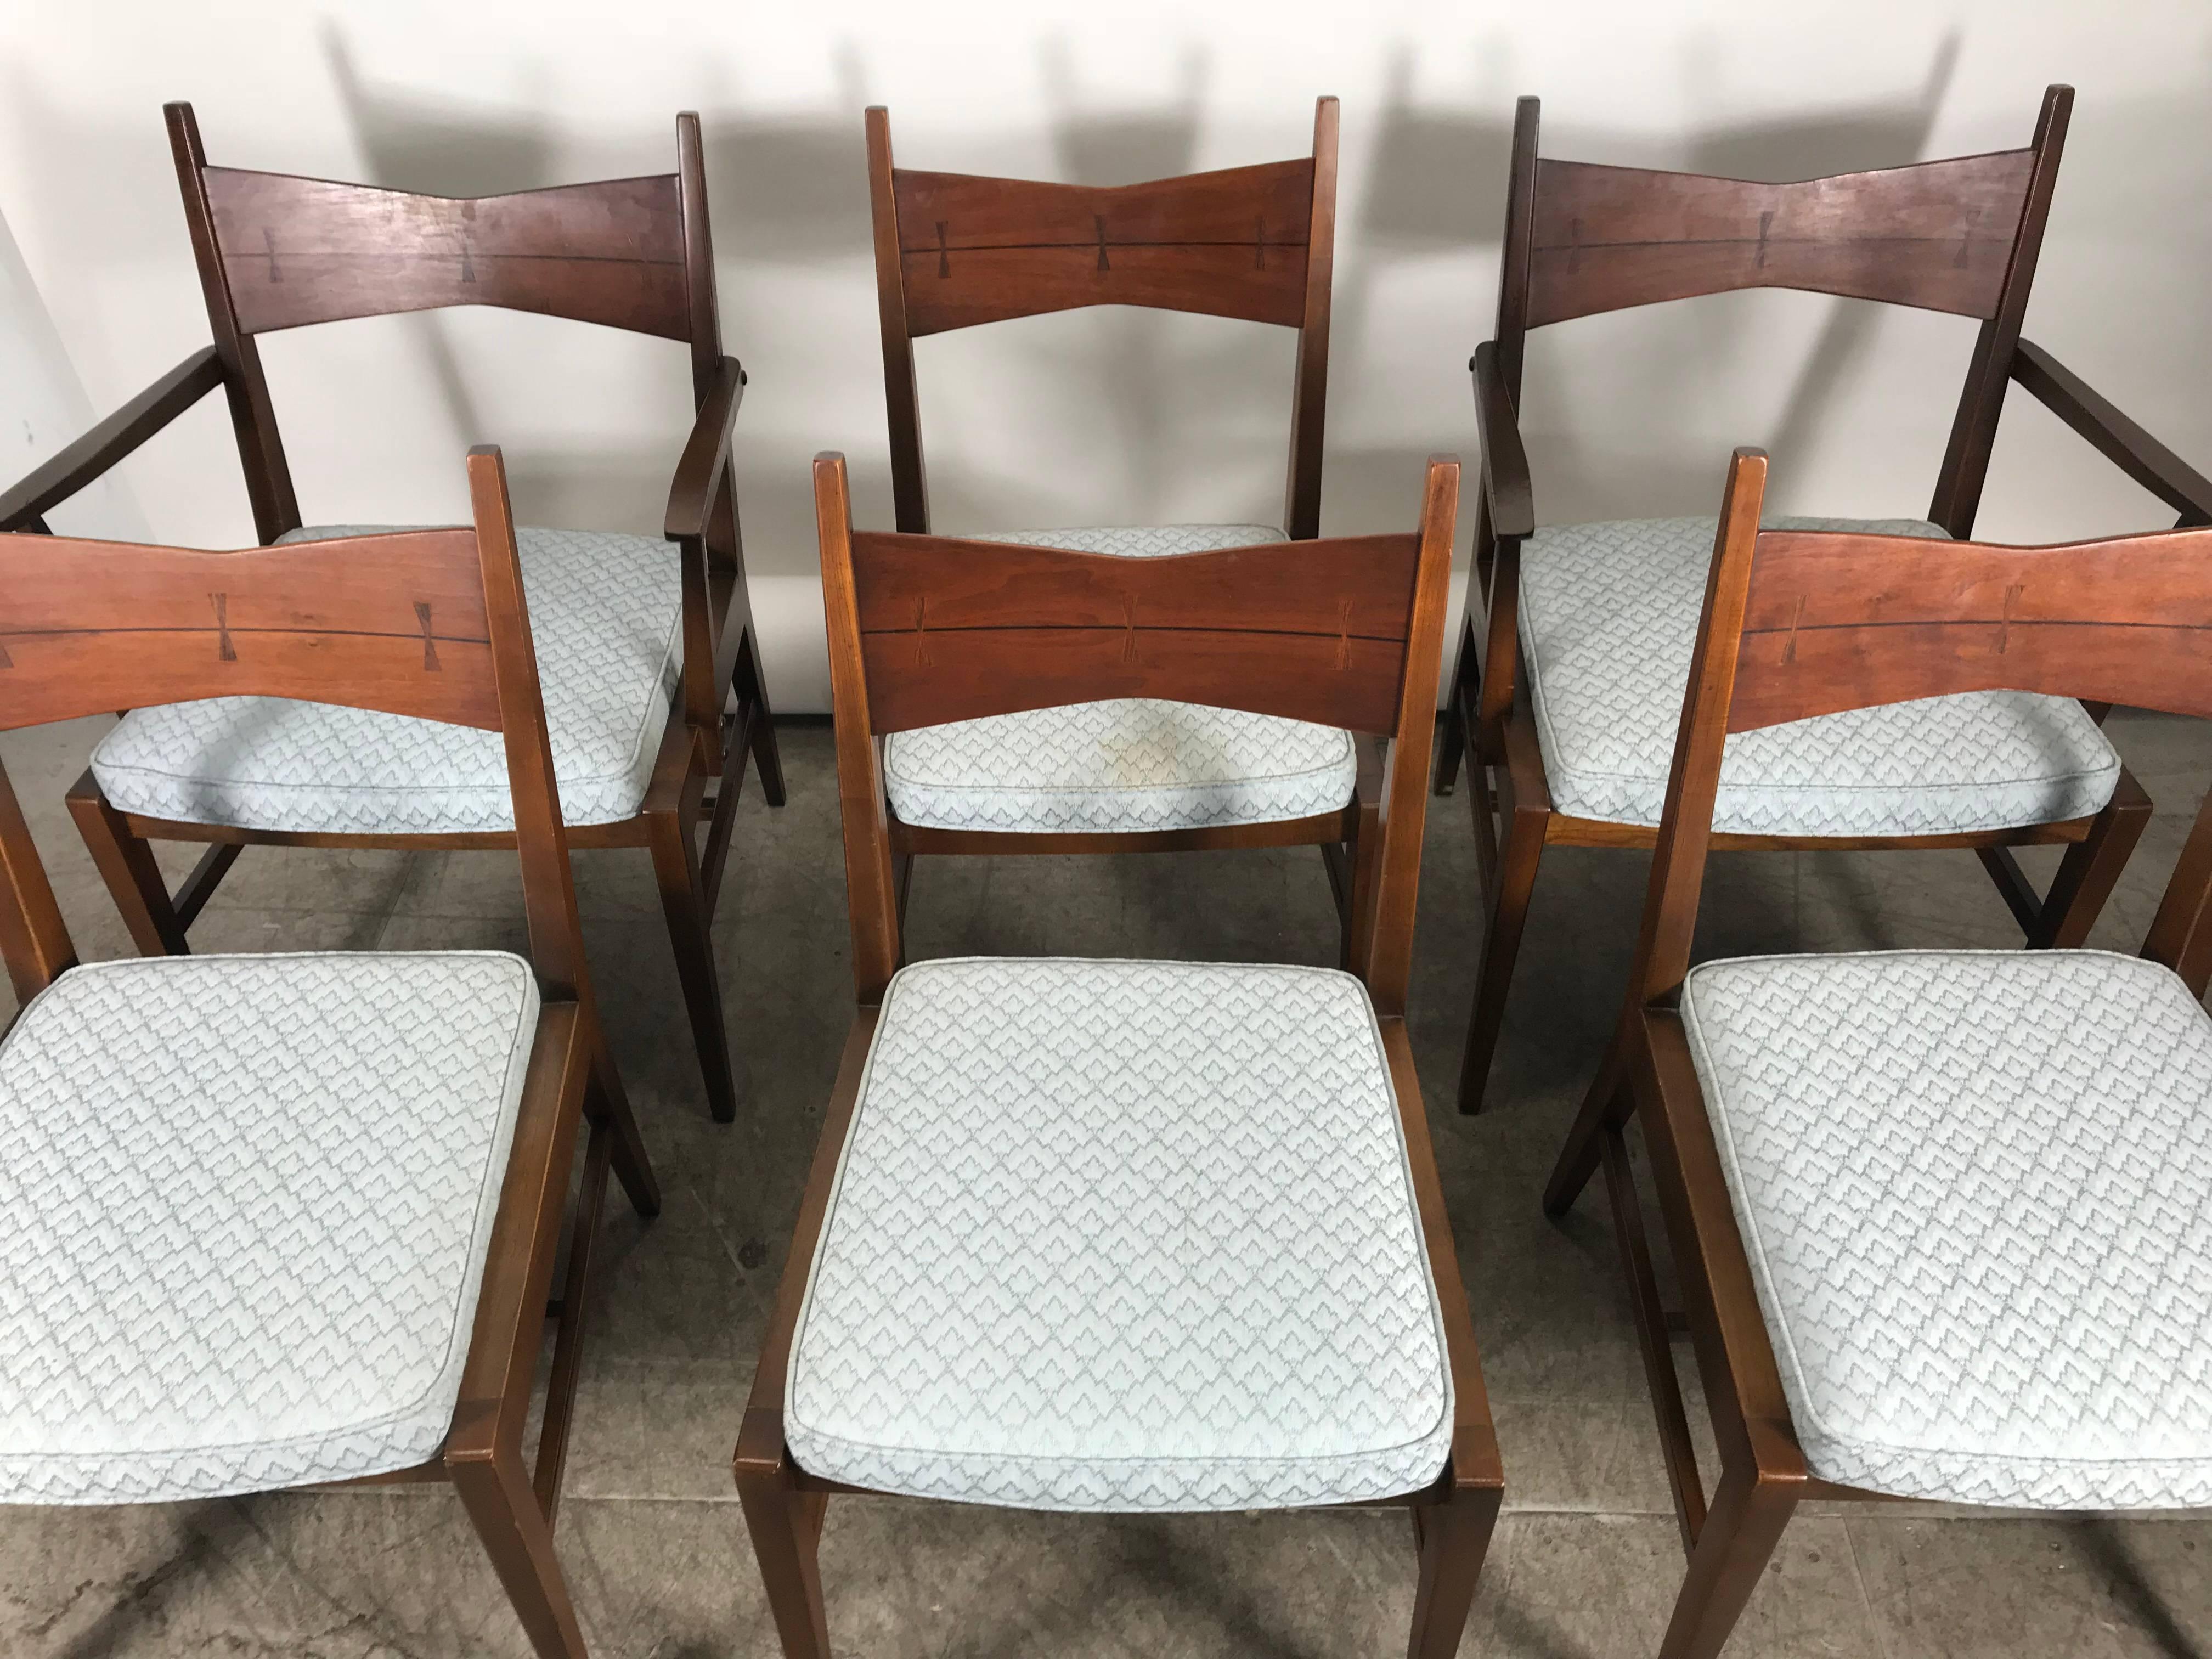 Set of six Mid-Century Modern dining chairs, lane tuxedo line, bow tie backs, very reminiscent of classic design by Paul McCobb Chairs in walnut, rosewood butterfly inlay detail, structurally sound, quality construction, Classic modernist design.